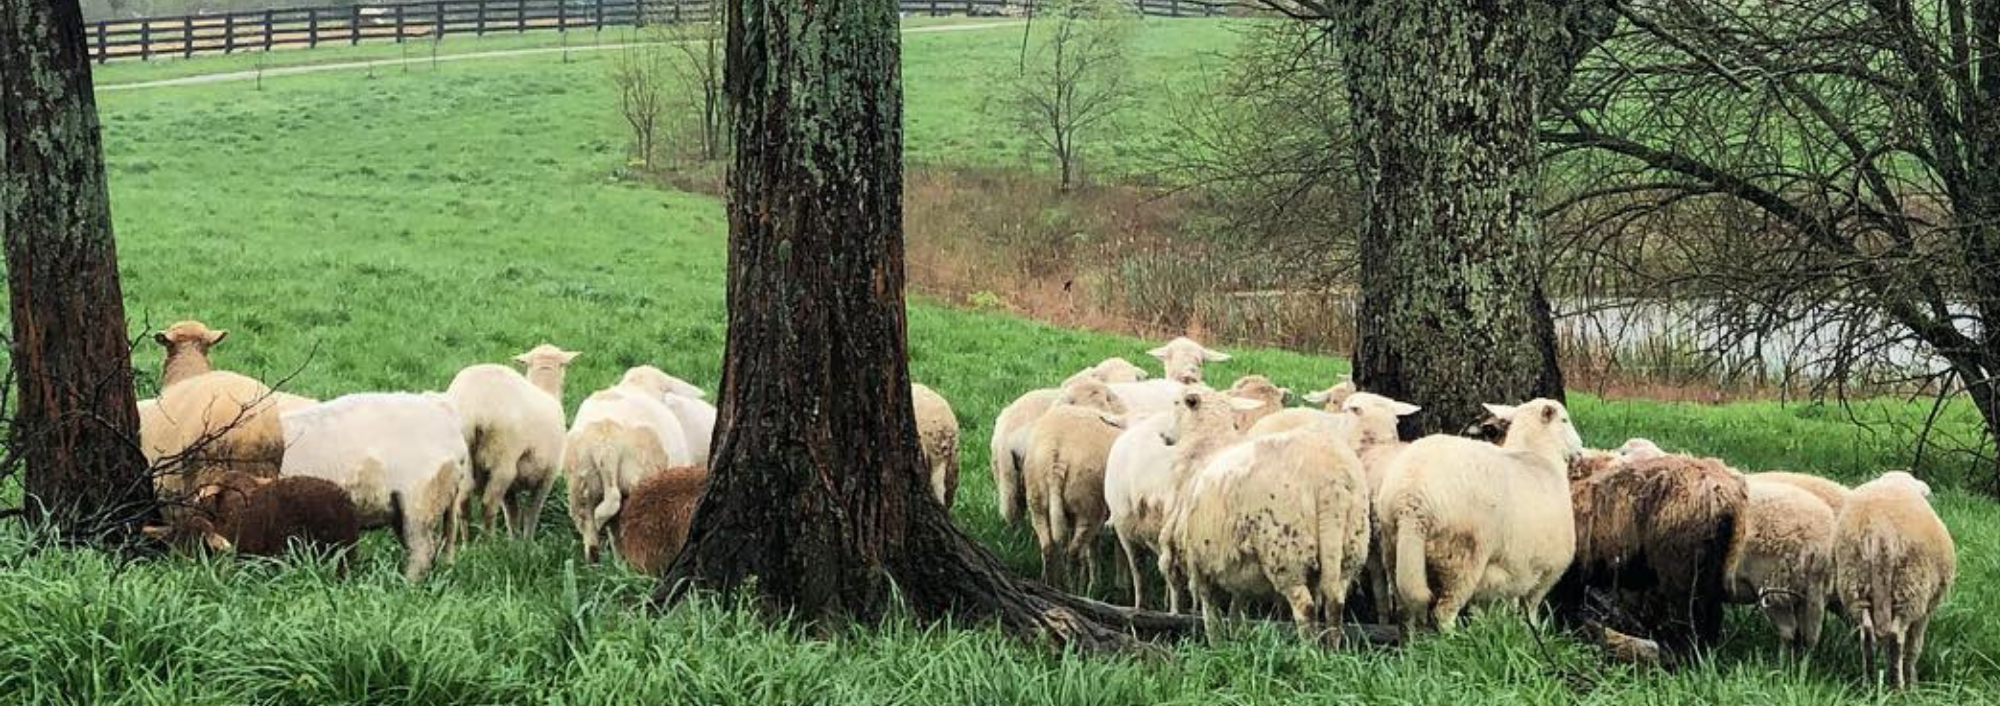 Freedom Run Farm Lamb: From Pasture to Plate